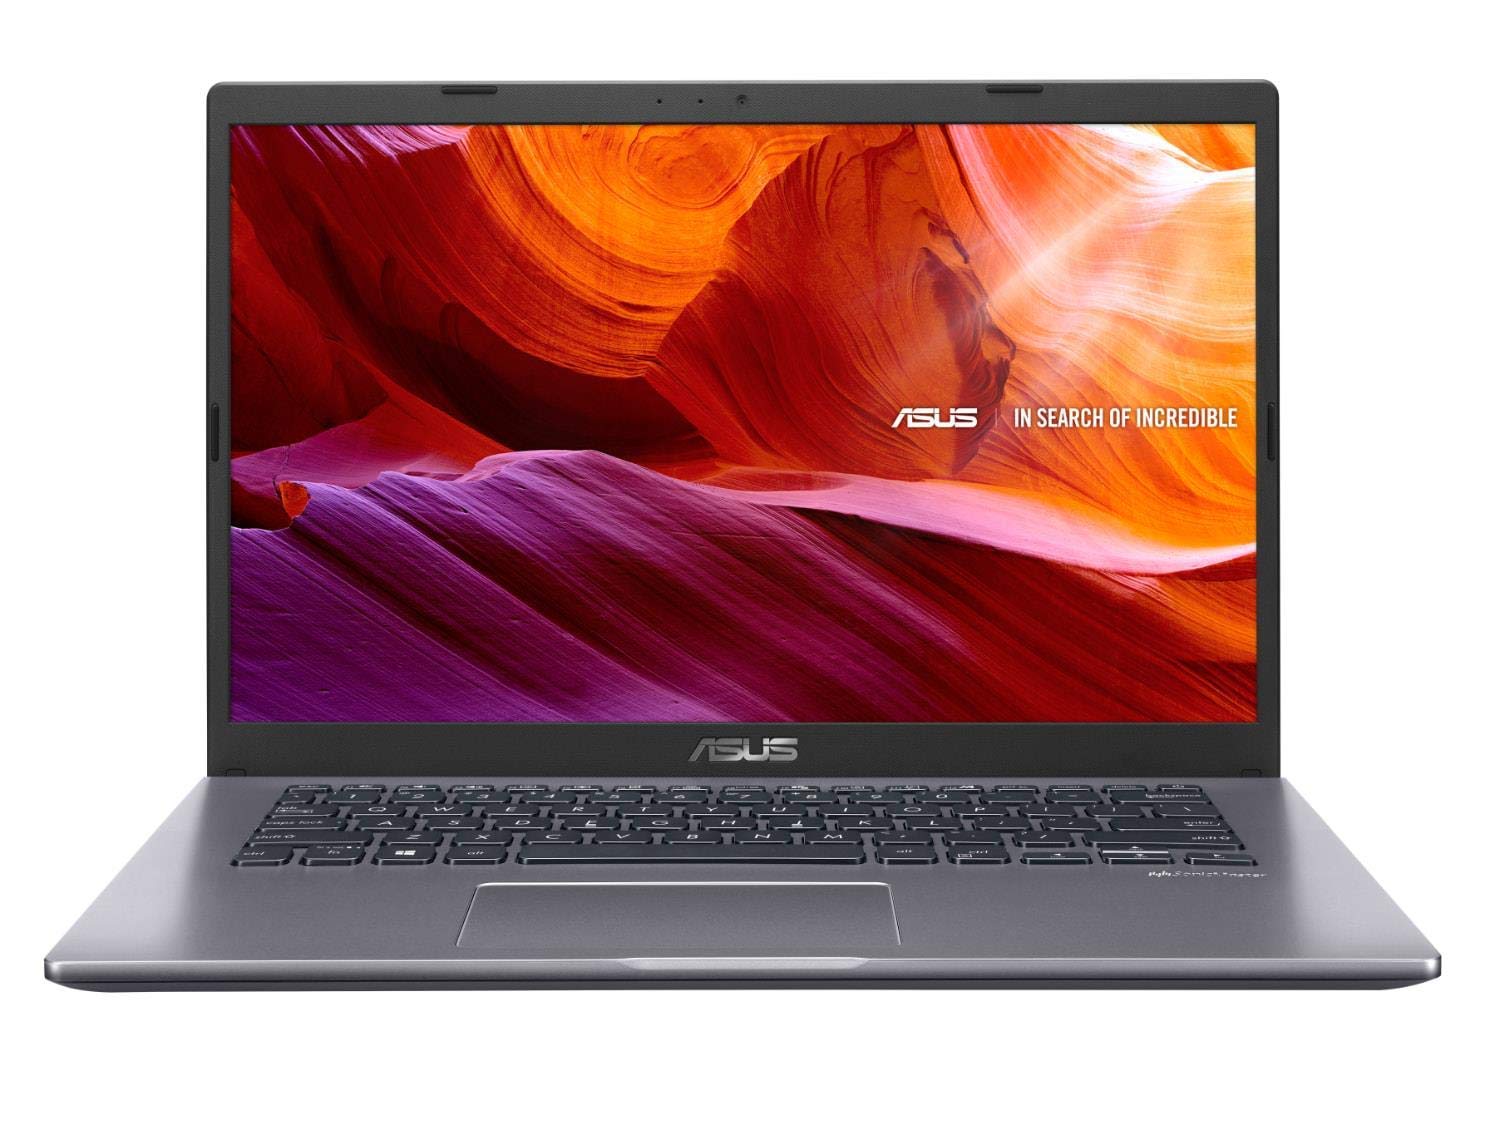 ASUS Vivobook 14 Intel Core i3 10th Gen (14.1 inches, 4GB1 TB HDDWindows 10 Home) X409FA-BV301T Thin and Light Laptop